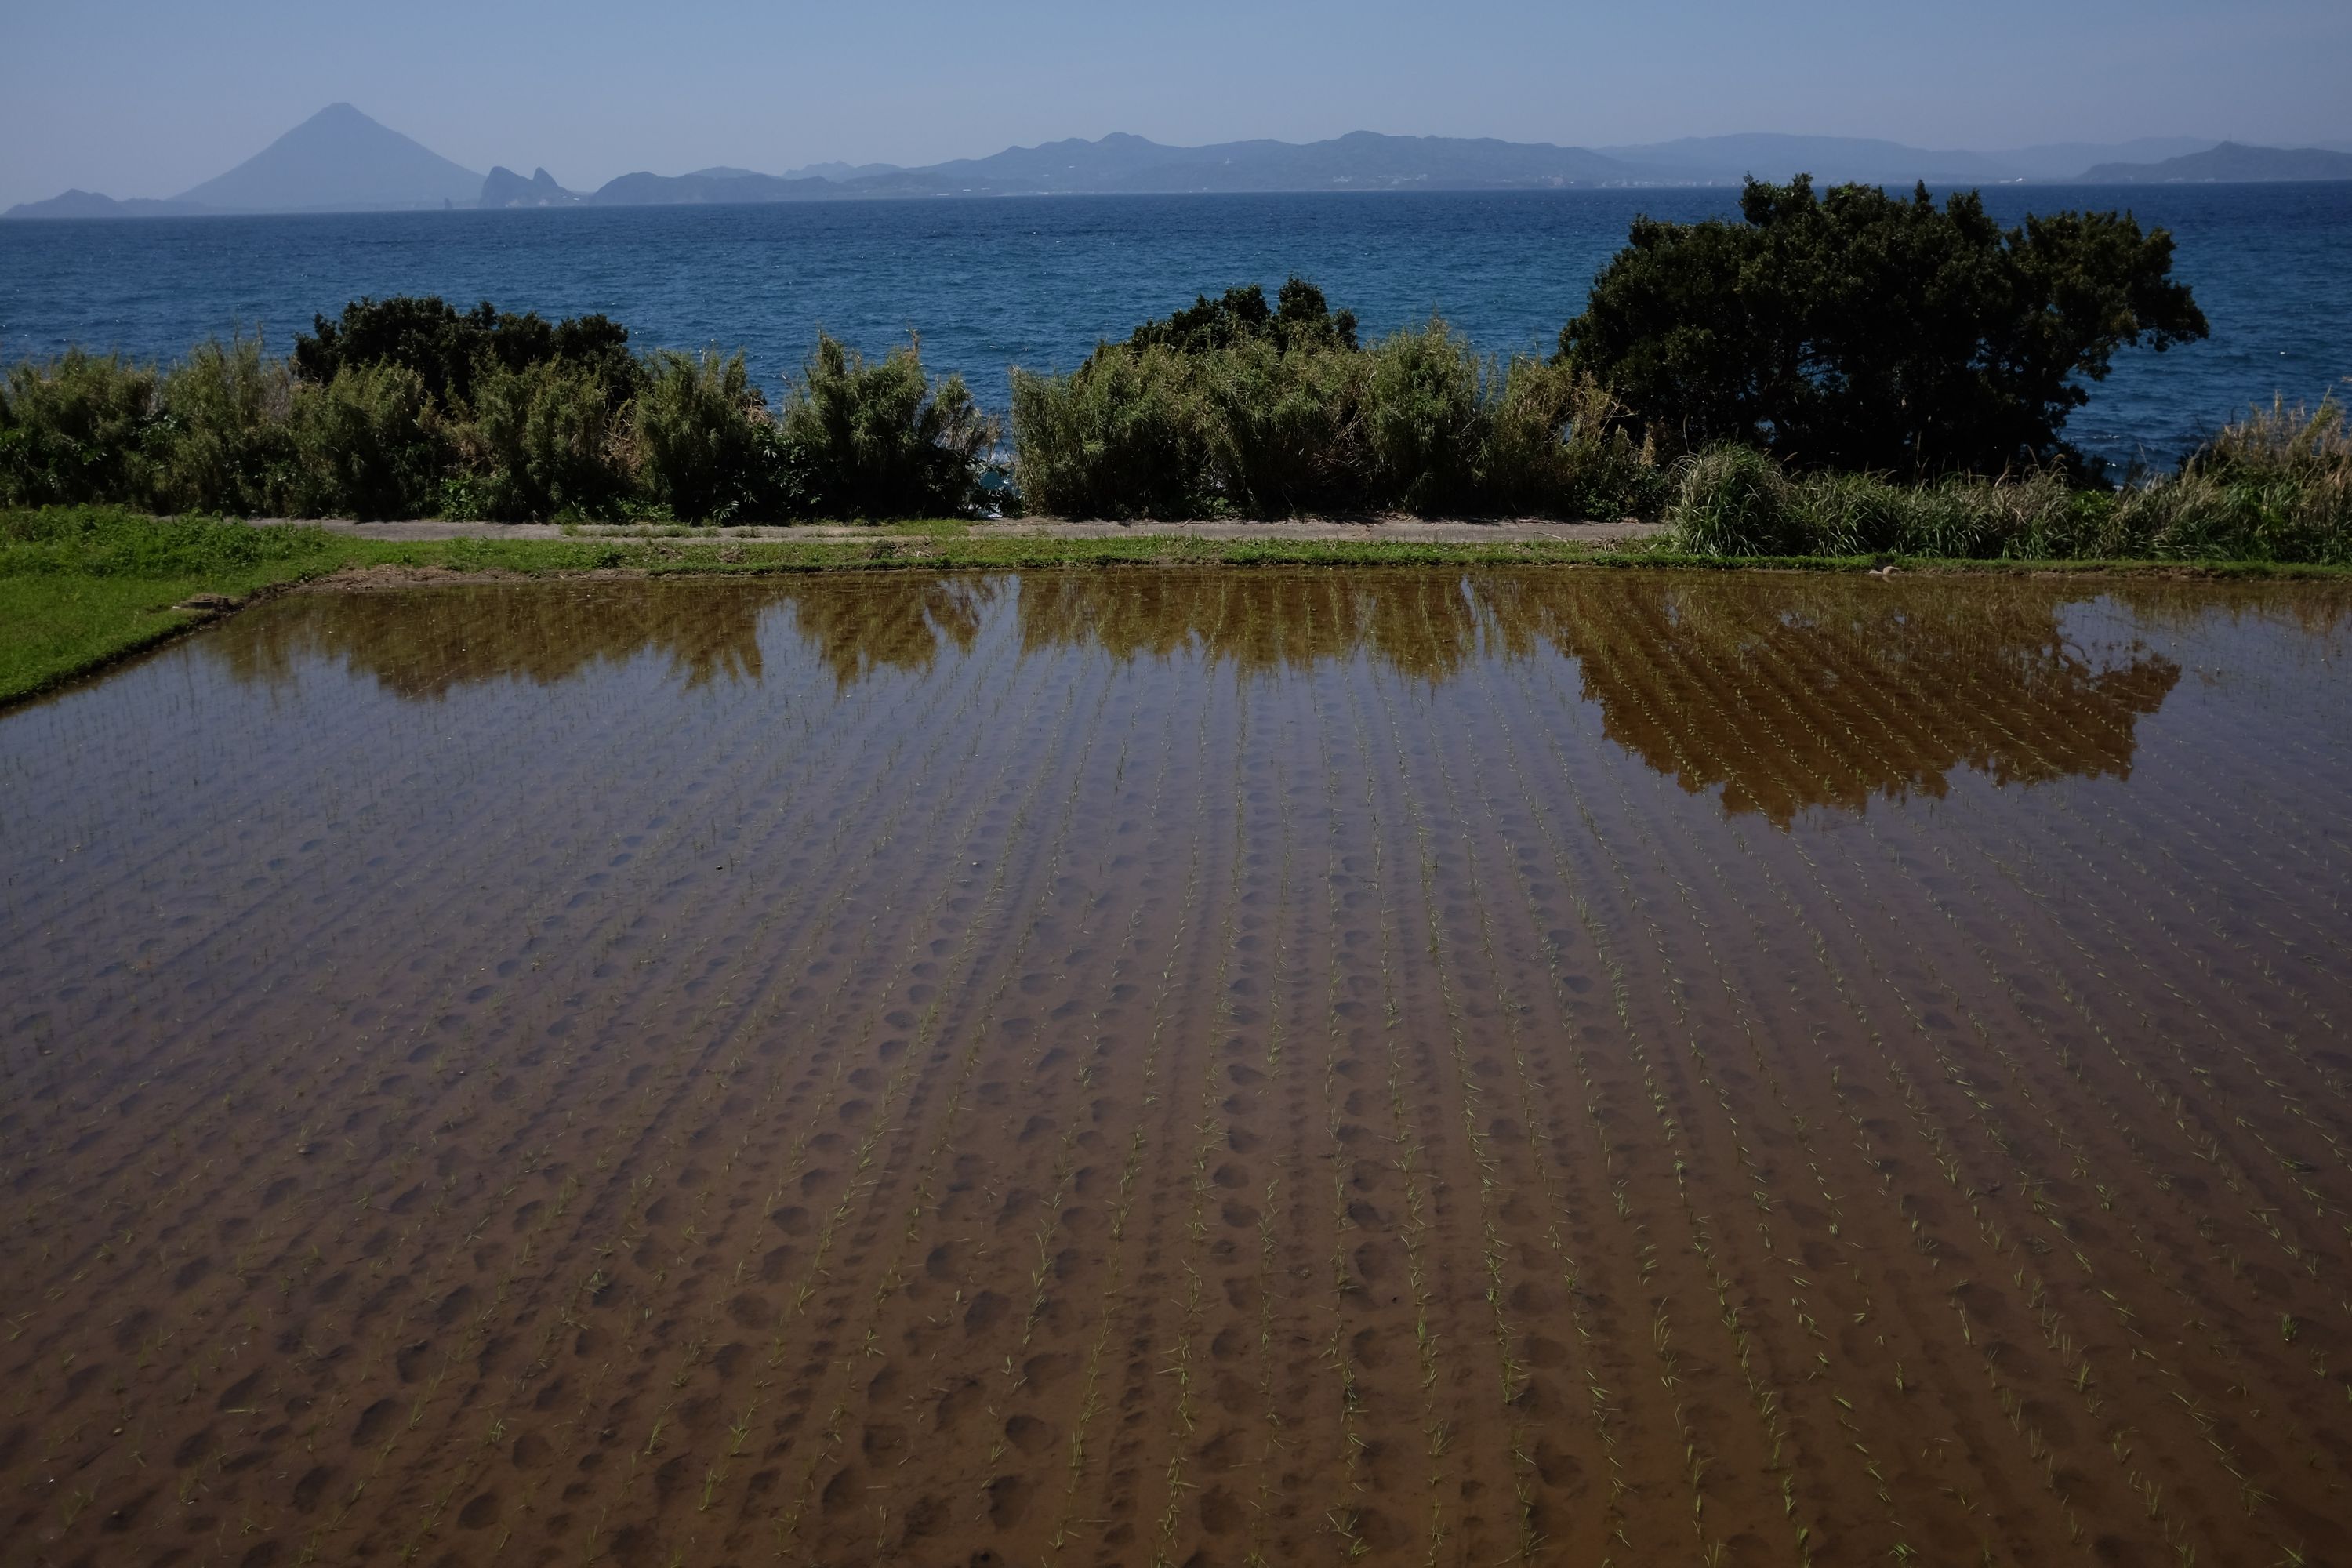 Freshly planted, flooded rice fields overlooking the bay and Mount Kaimon.